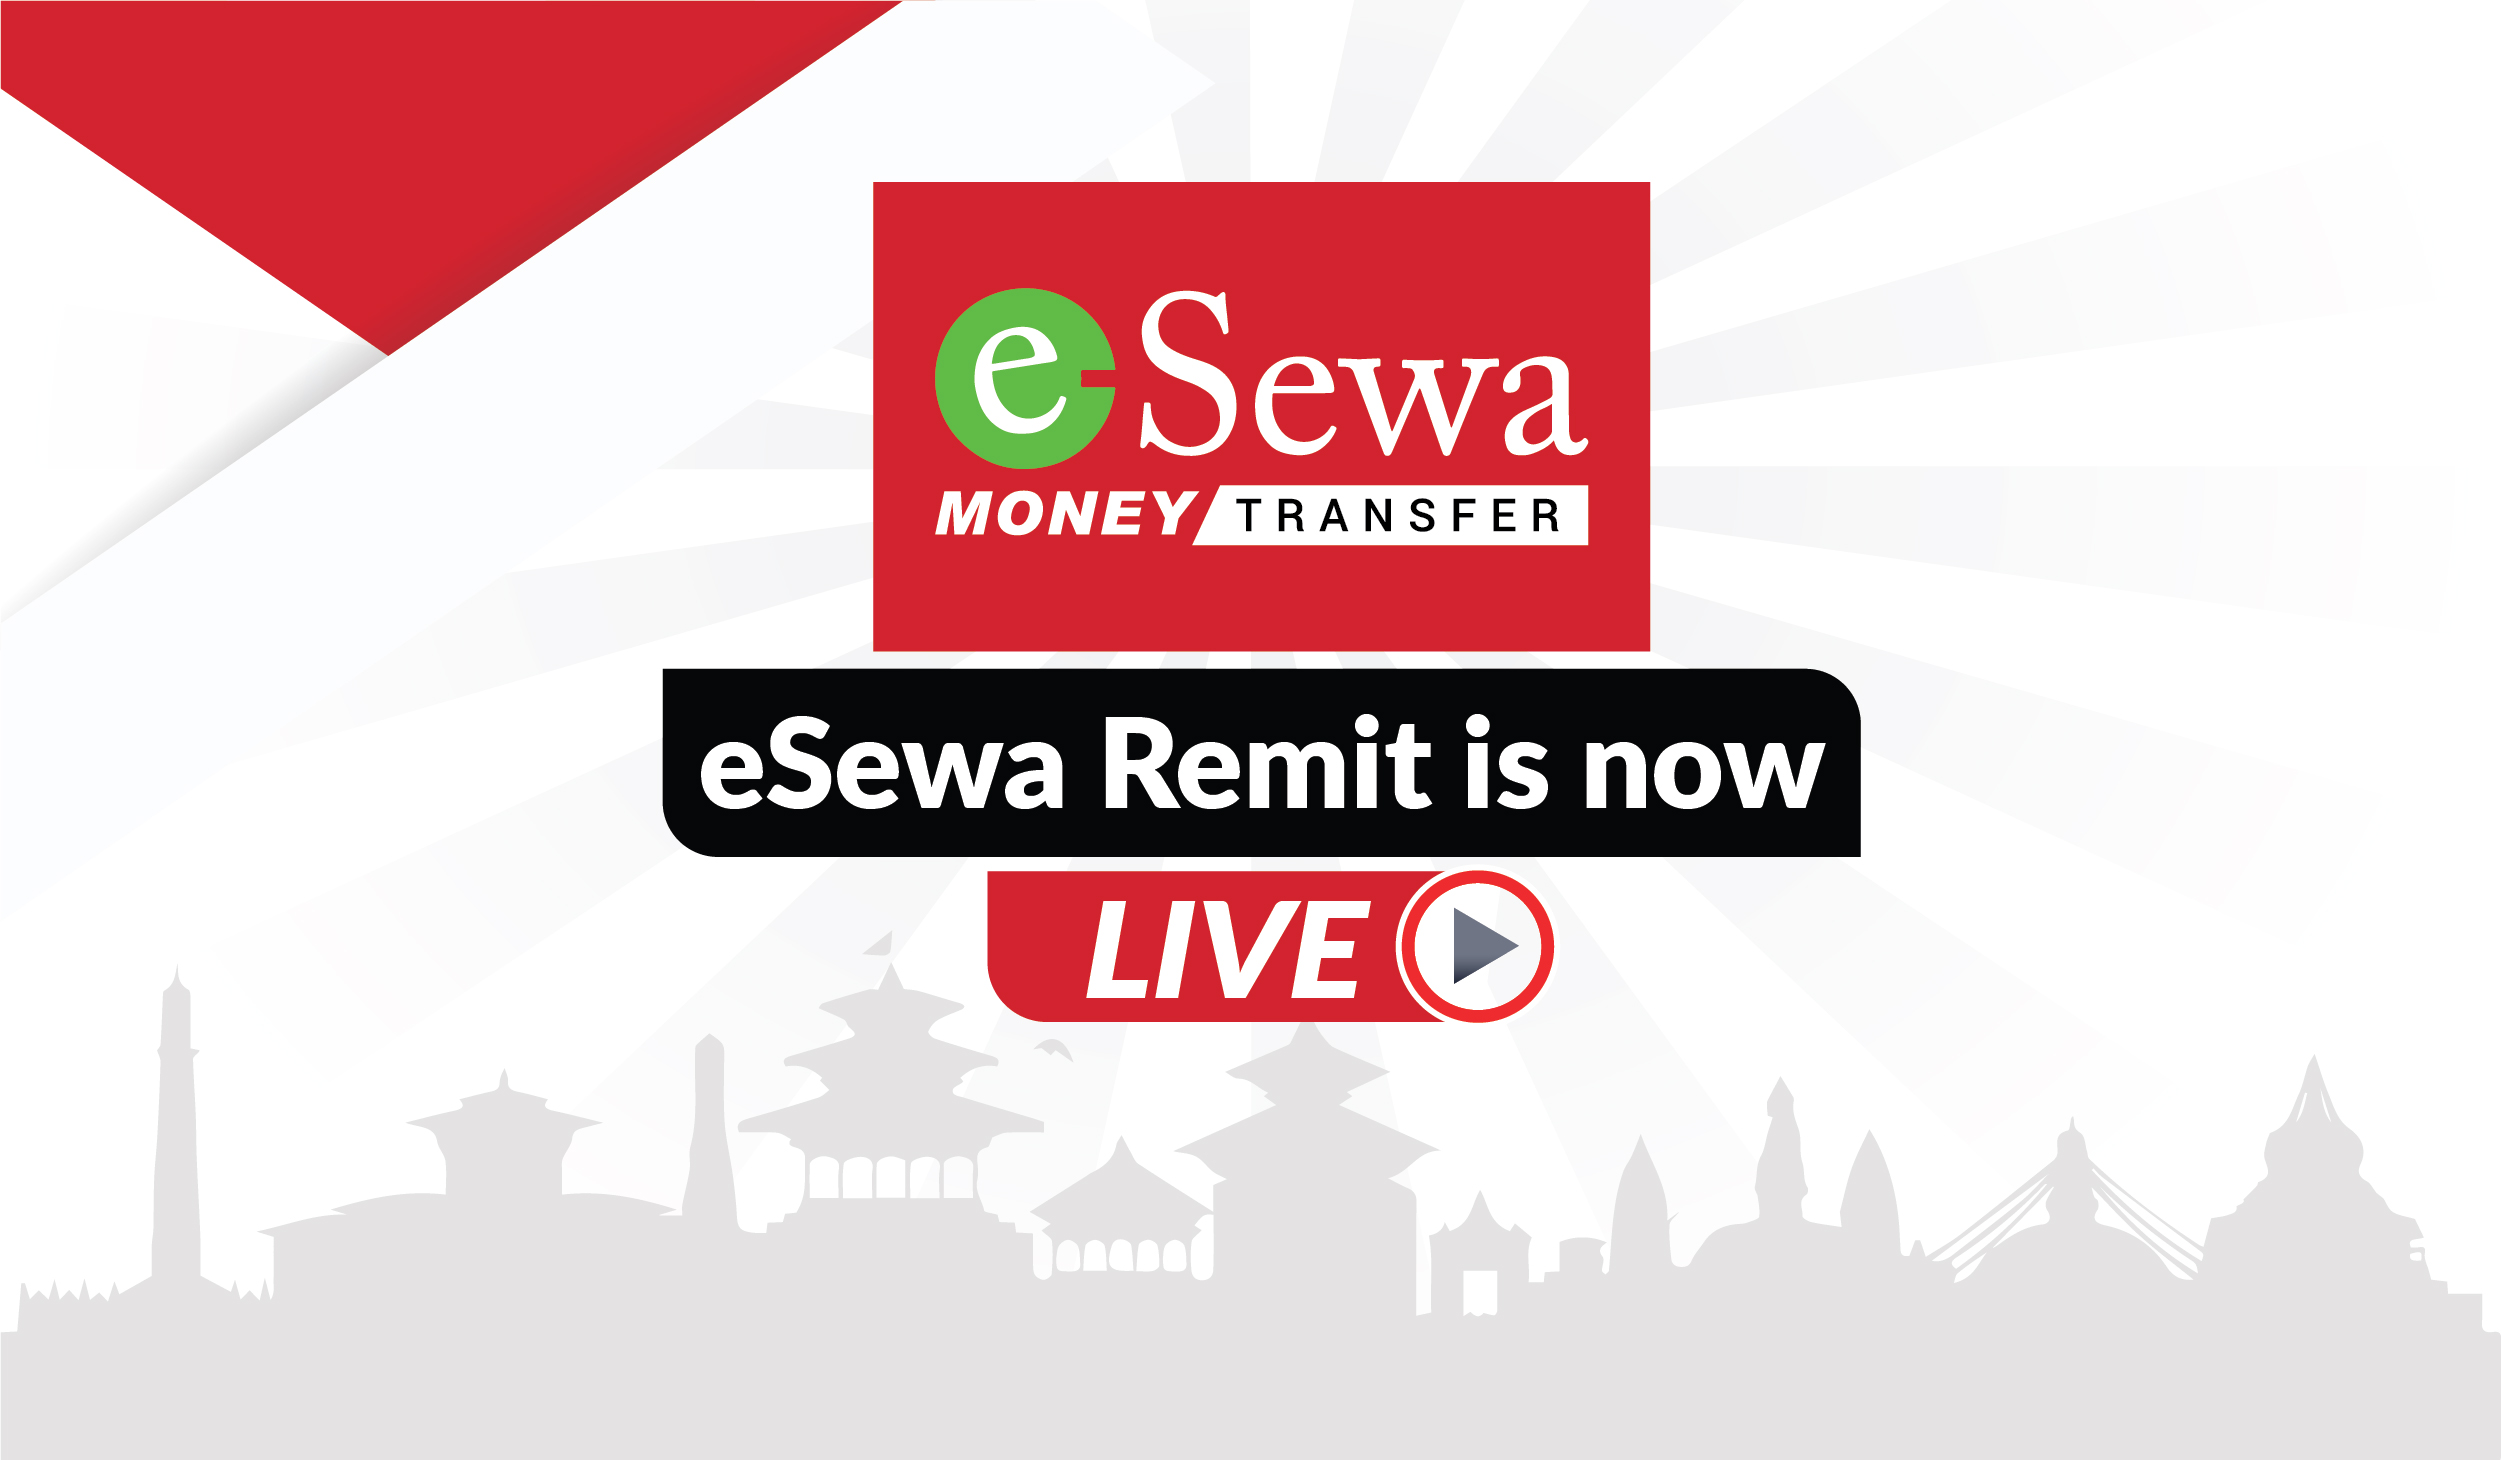 Introducing eSewa Money Transfer for easy, secured remittance